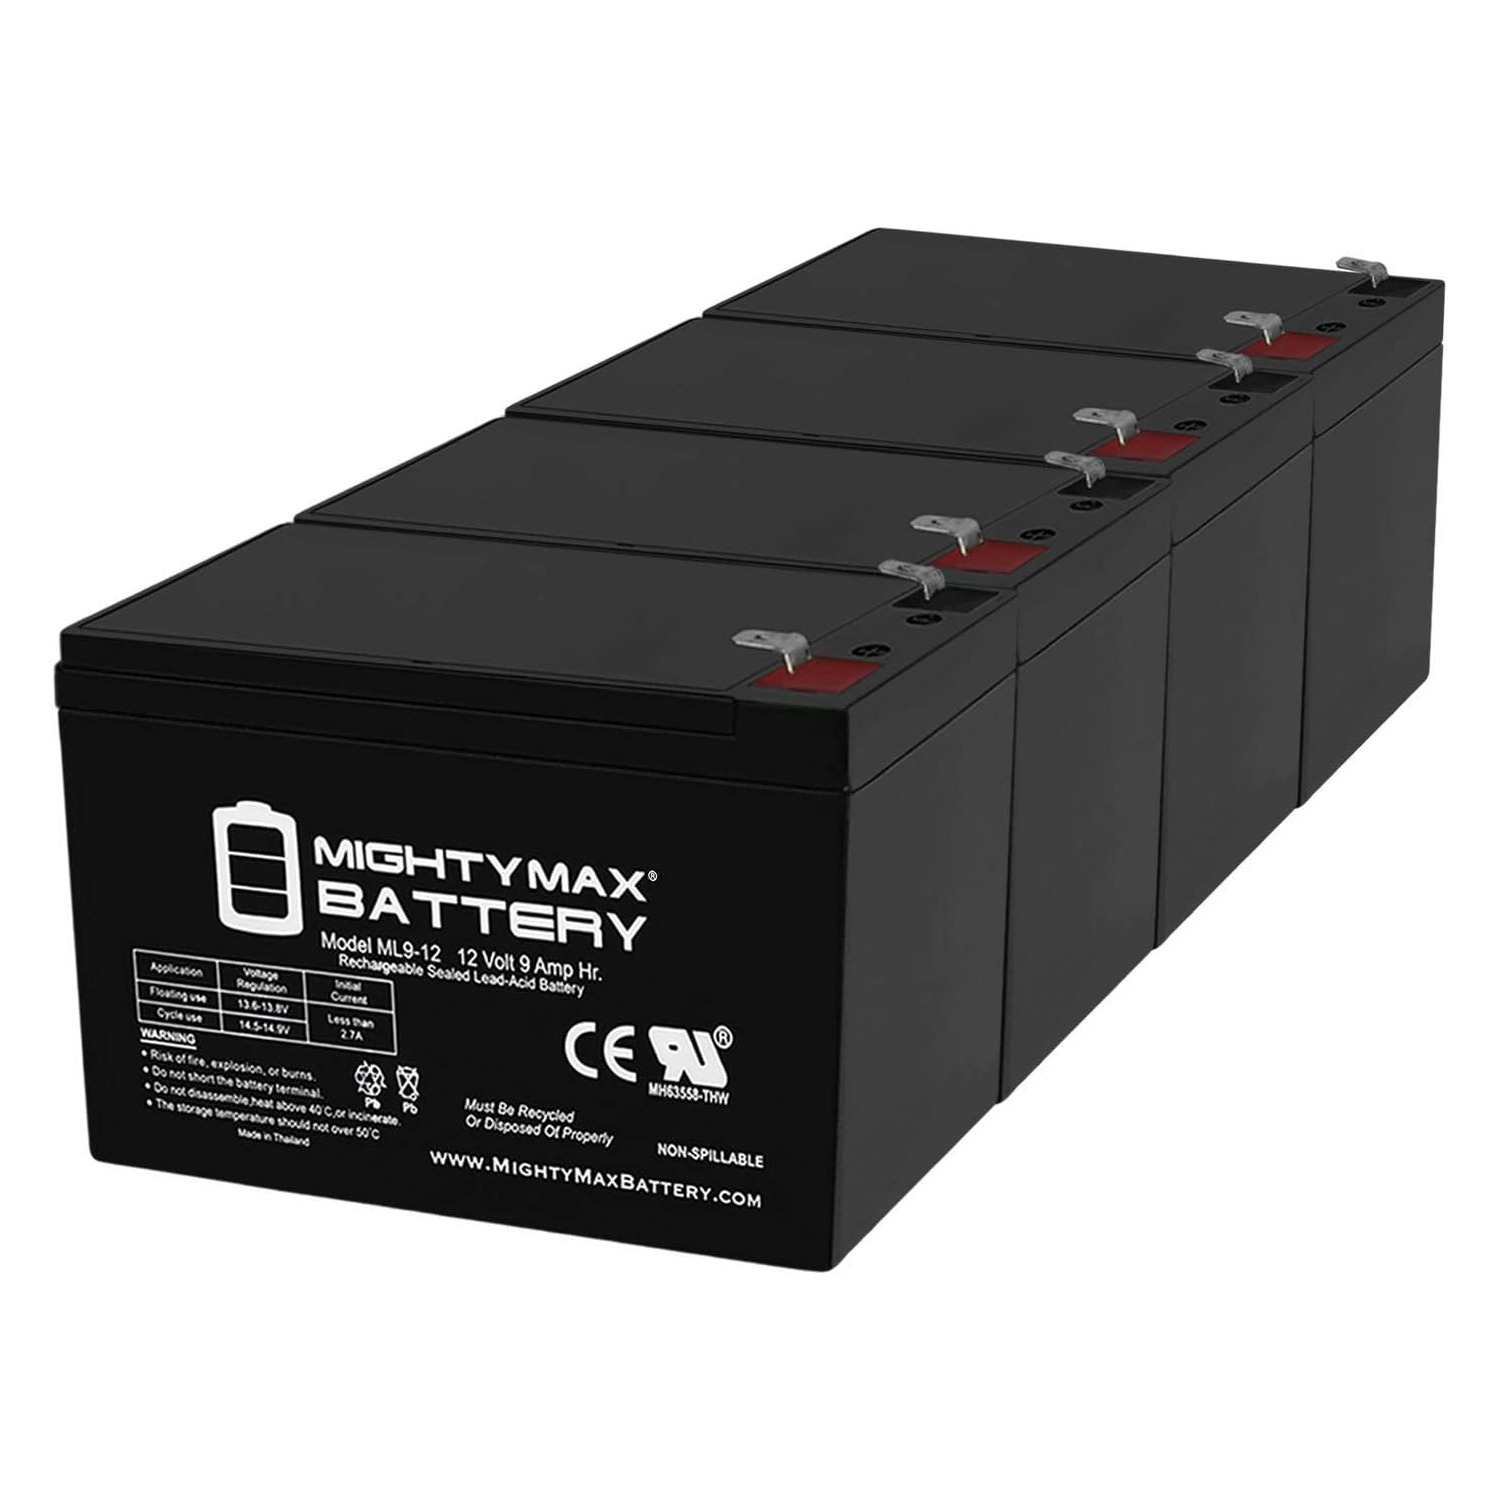 Altronix SMP7PMCTXPD16 12V, 9Ah Lead Acid Battery - 4 Pack